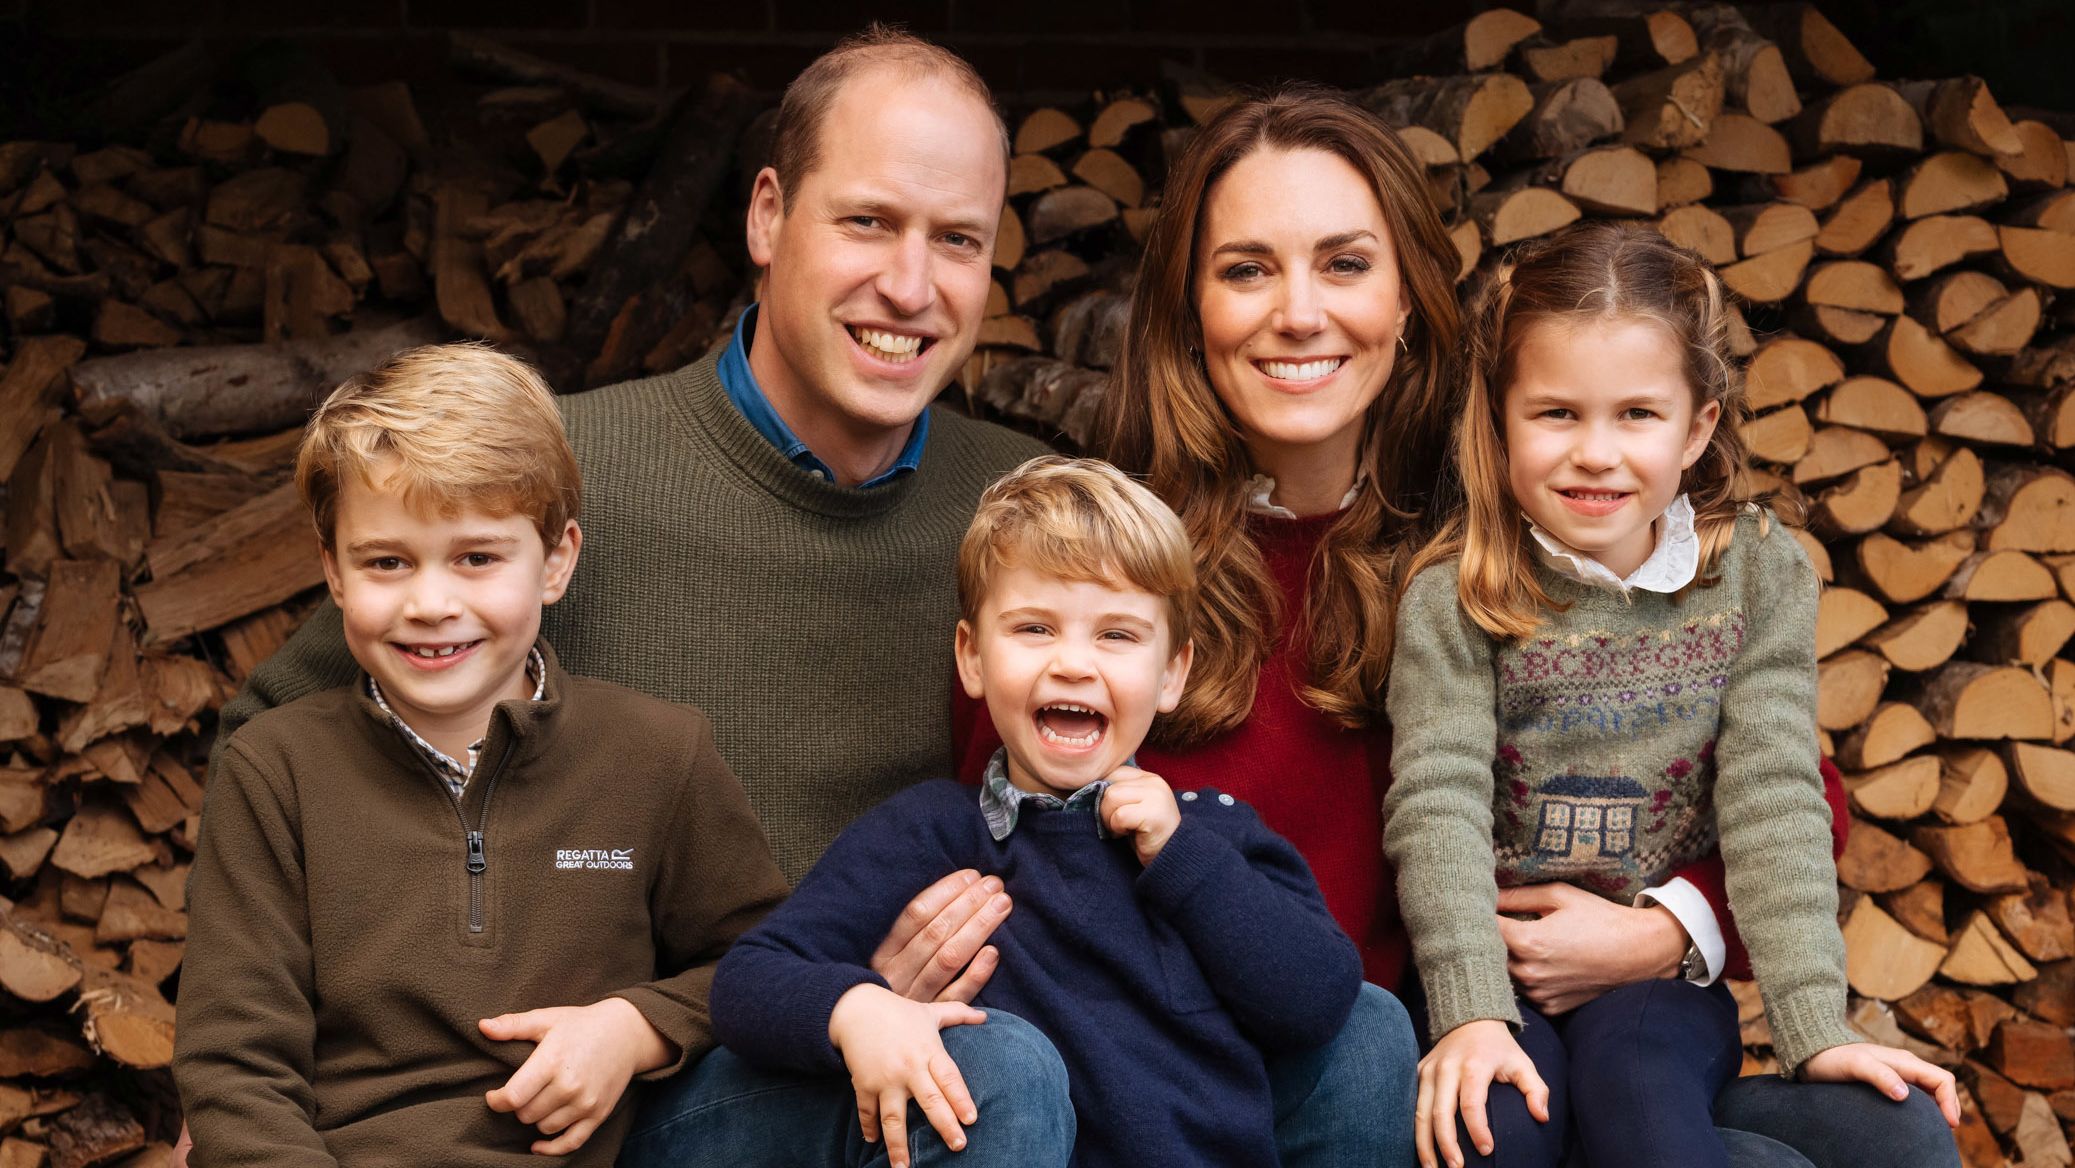 This image provided by Kensington Palace made the family's <a href="https://edition.cnn.com/2020/12/16/uk/duke-duchess-cambridge-christmas-card-intl-scli-gbr/index.html" target="_blank">Christmas card</a> in 2020.